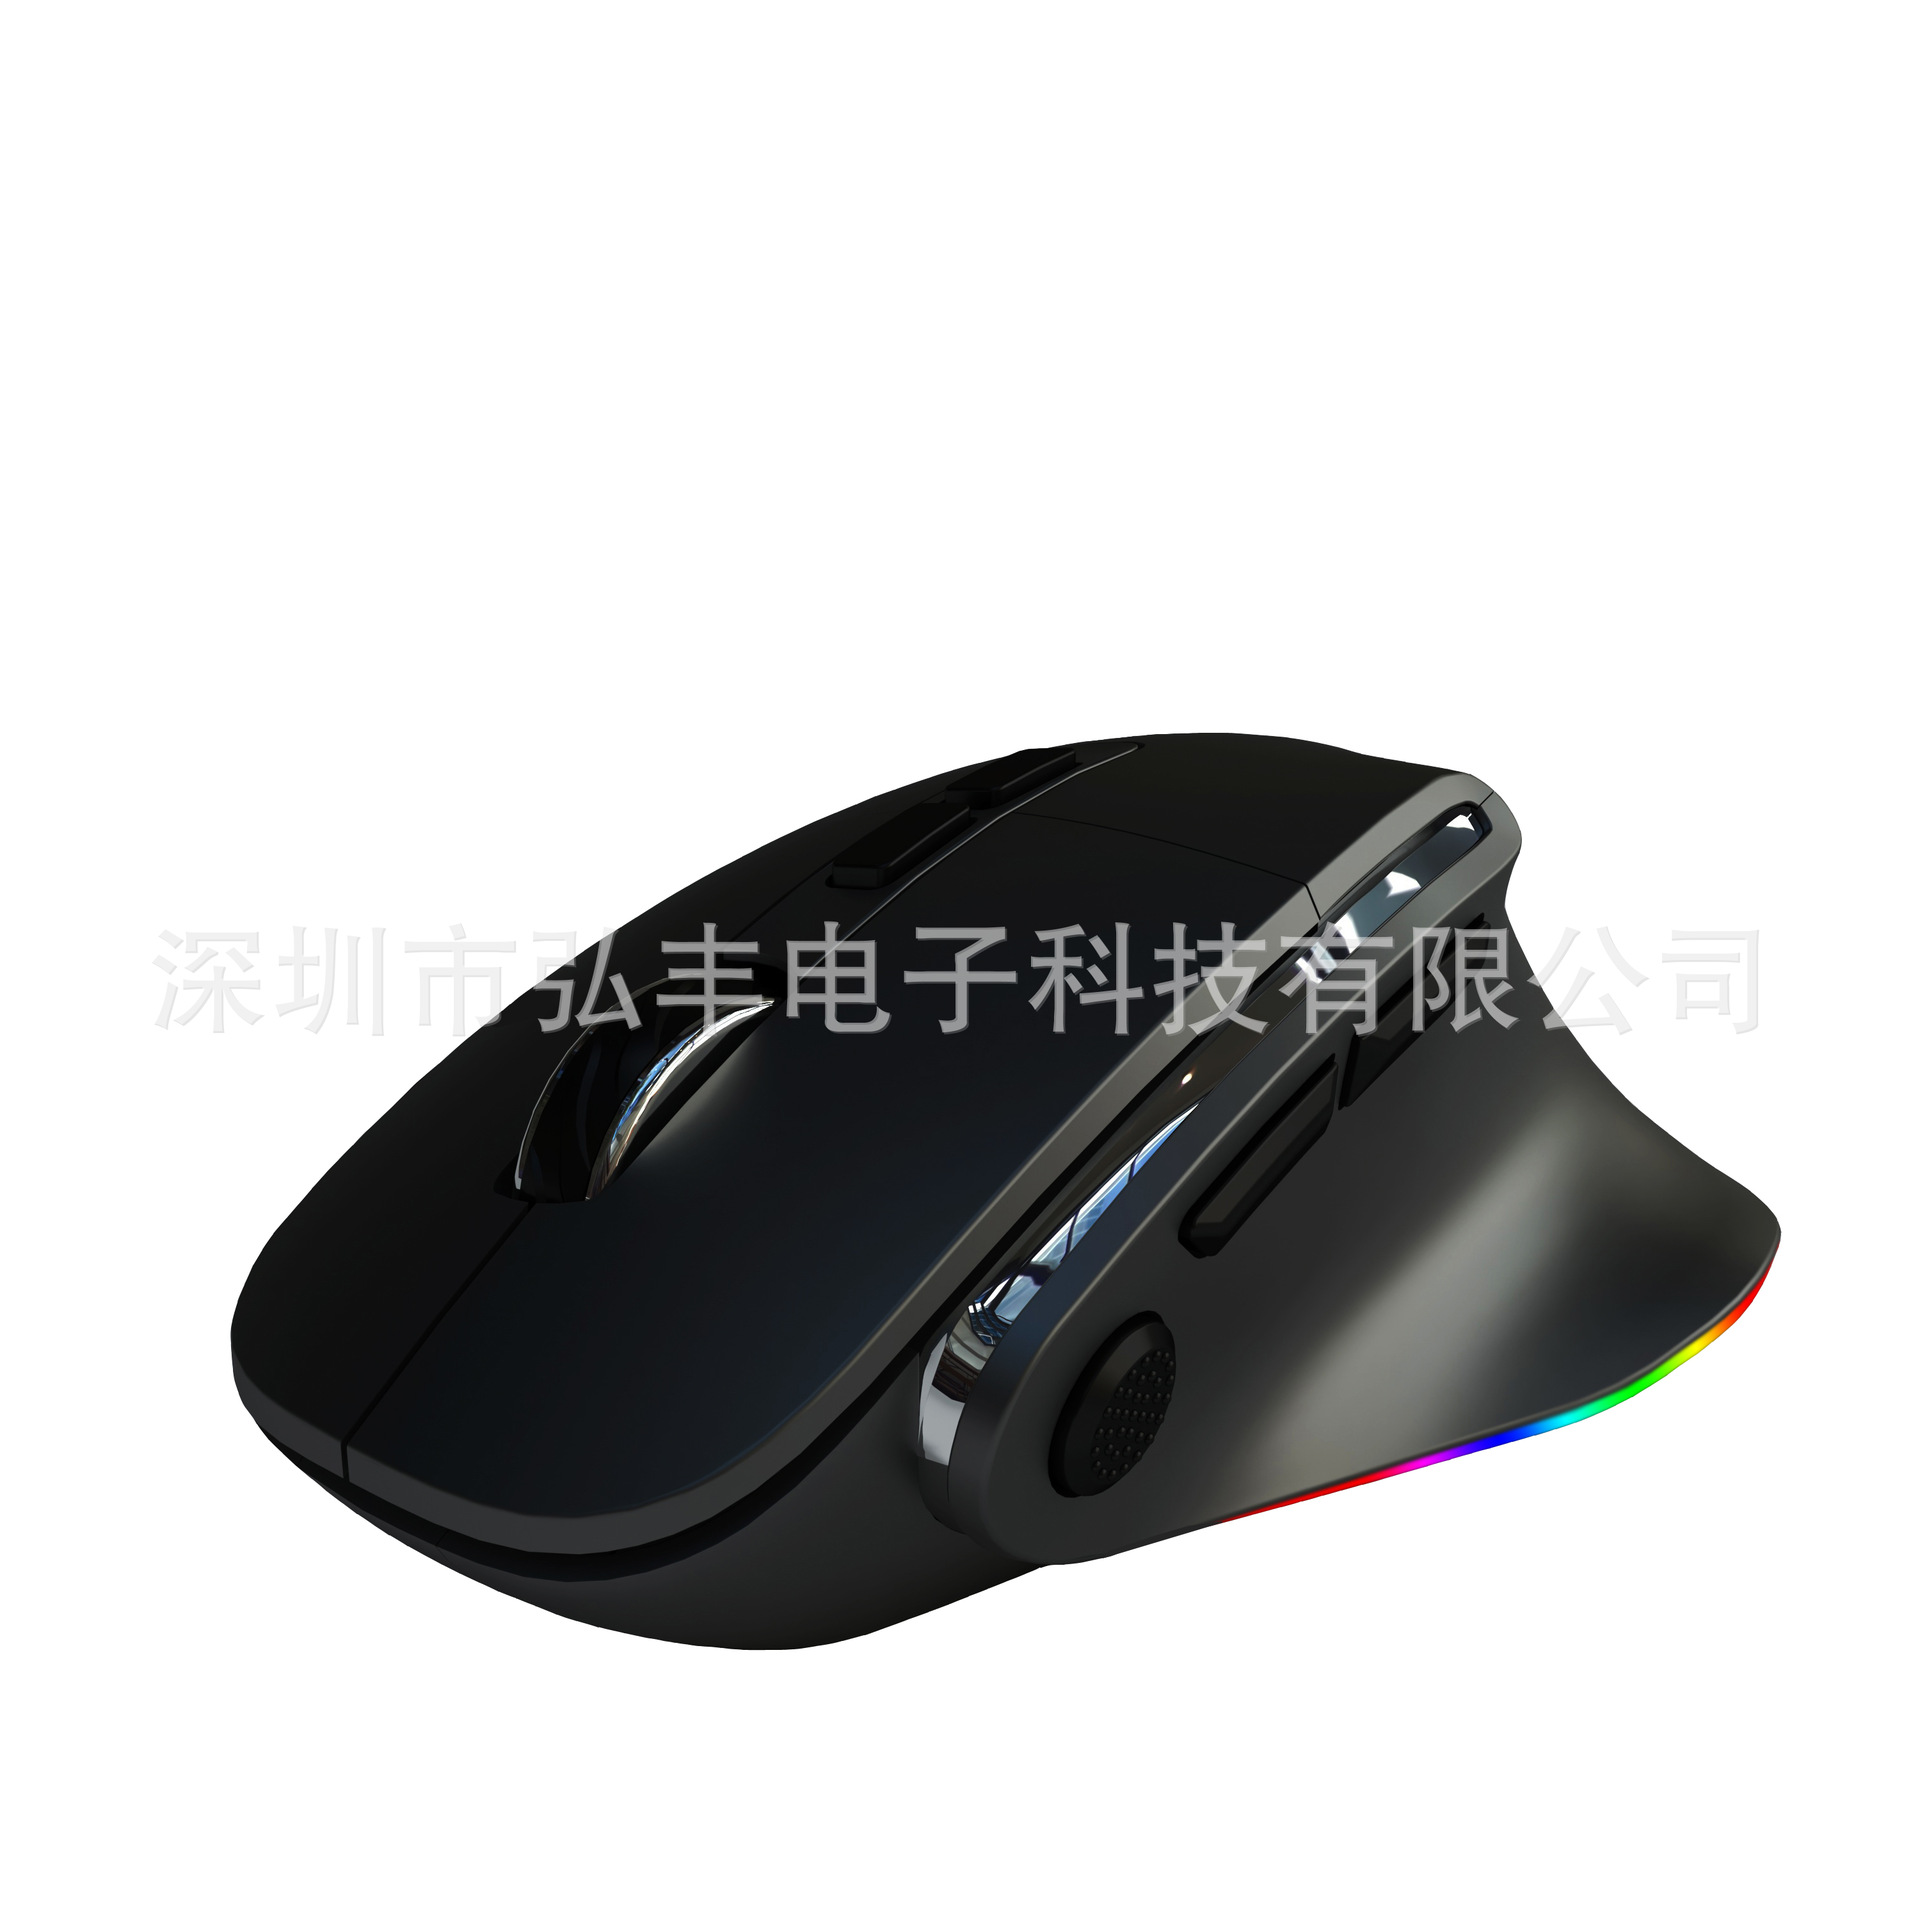 Vertical Wireless 2.4G Wired Dual-Mode Mouse Typec Charging with Finger Rest Gaming Mouse RGB Lamp Bingdian